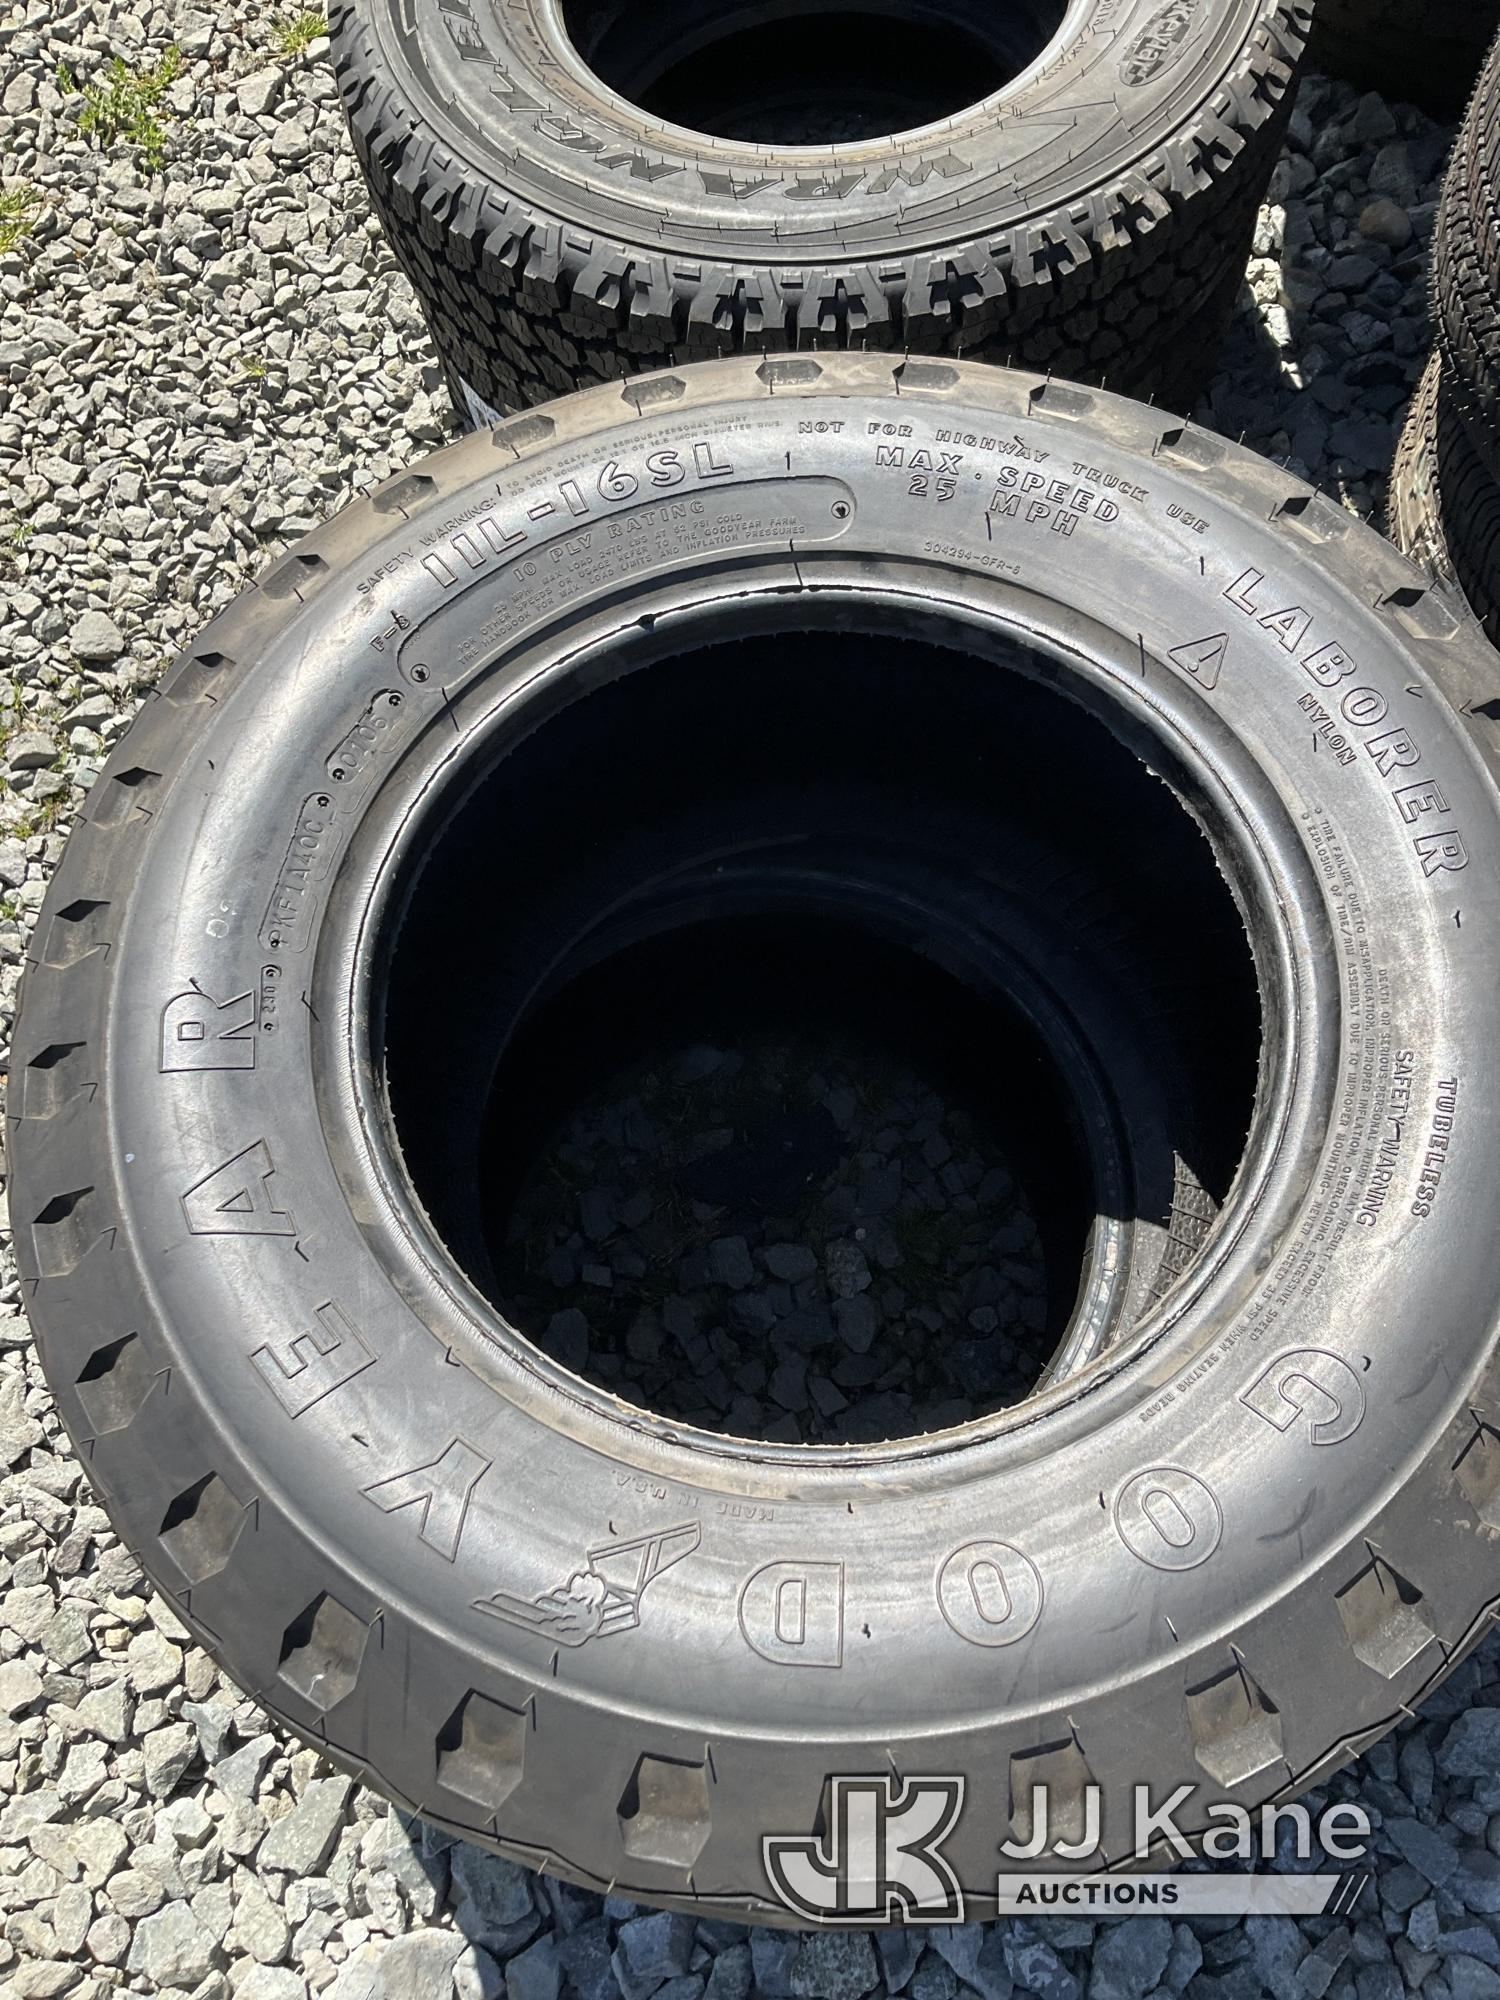 (Tacoma, WA) Misc. Tires: 2 Sets Of Complete Tires